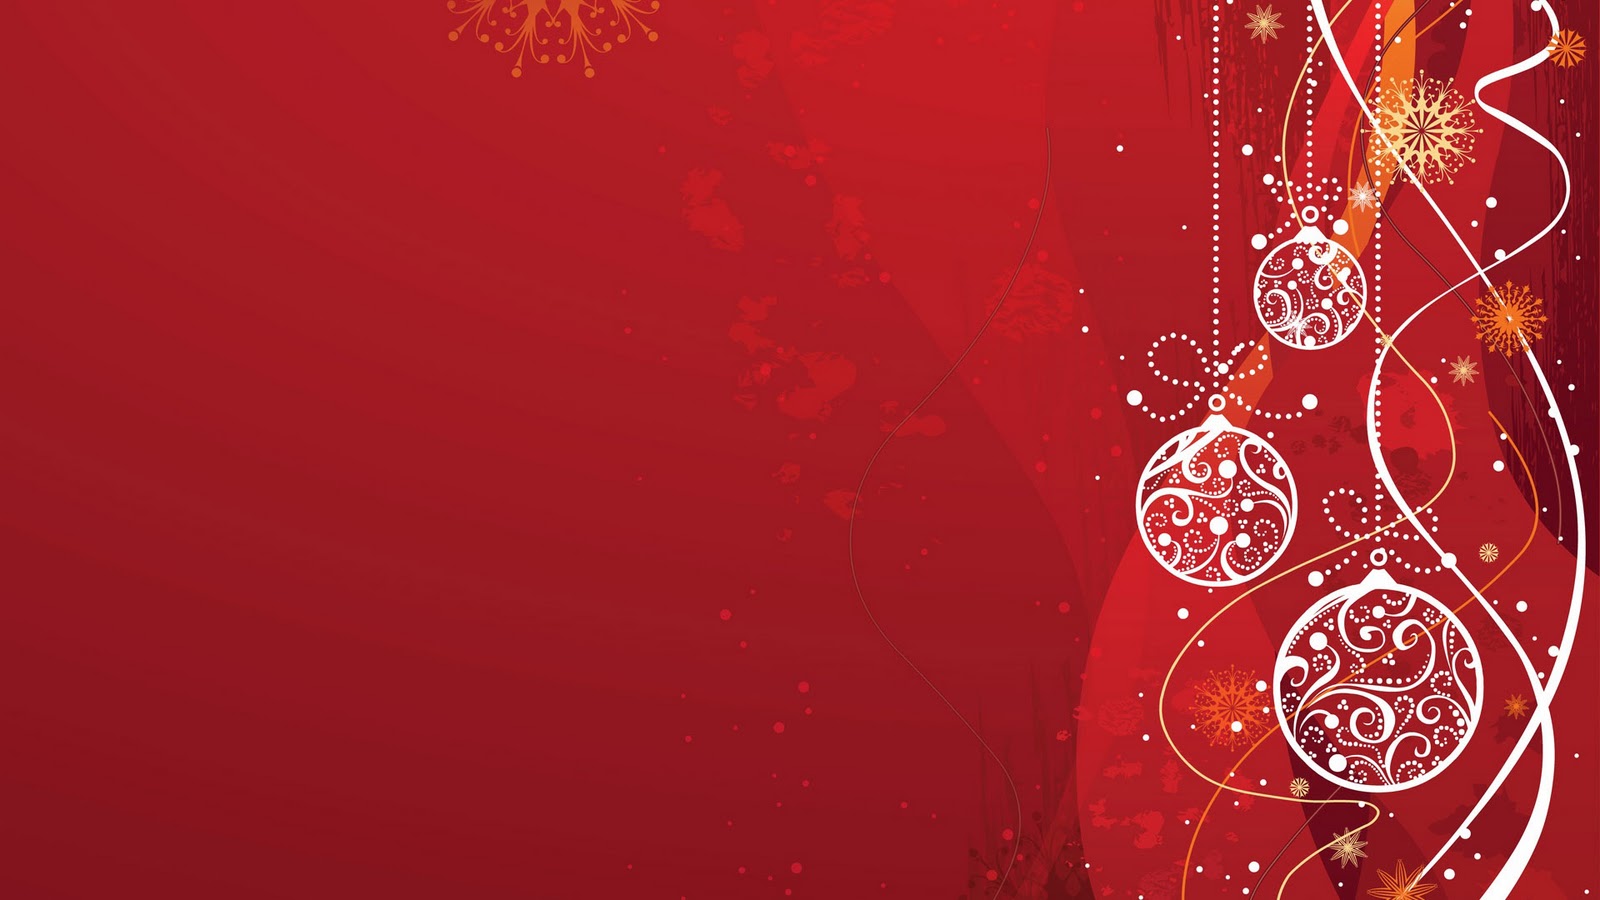 High Res Christmas Backgrounds Group (67+)